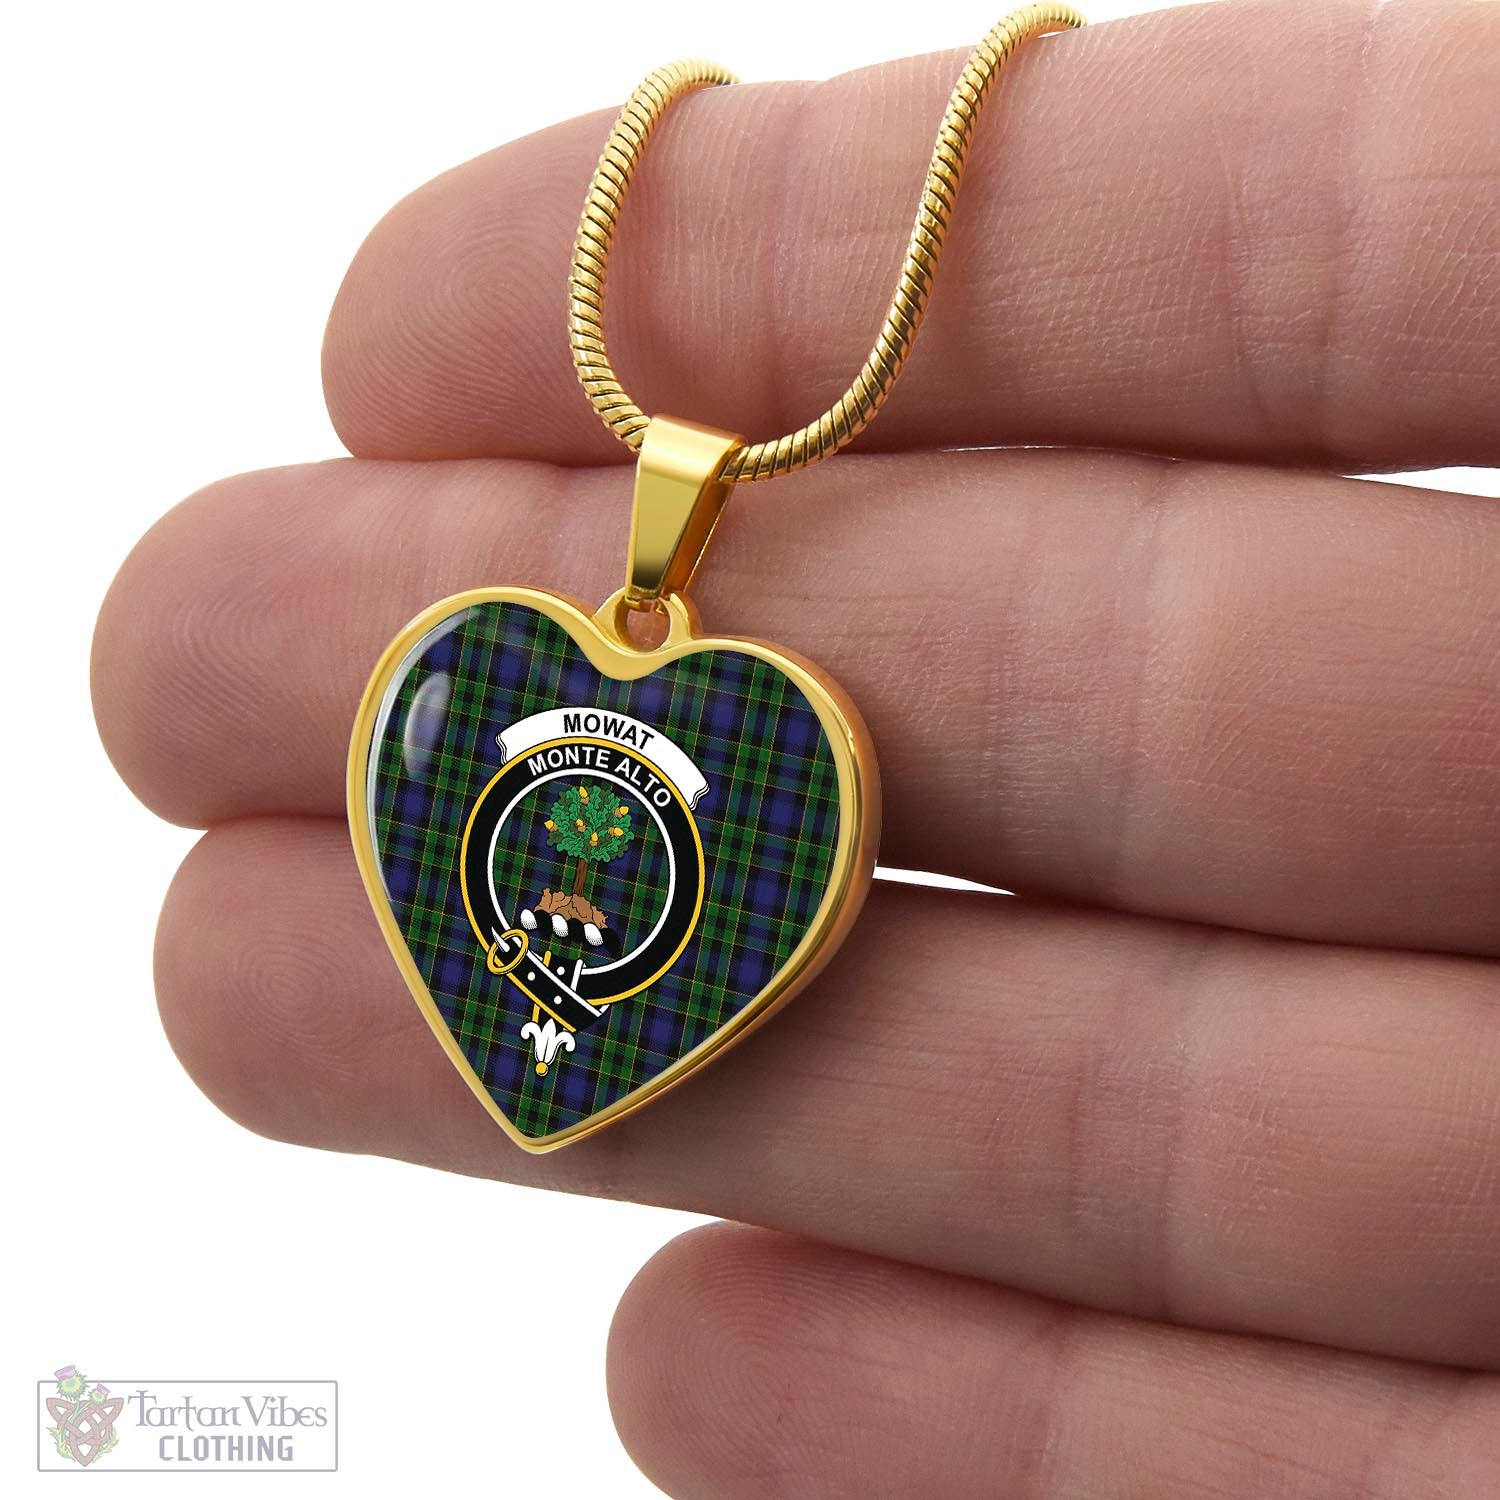 Tartan Vibes Clothing Mowat Tartan Heart Necklace with Family Crest